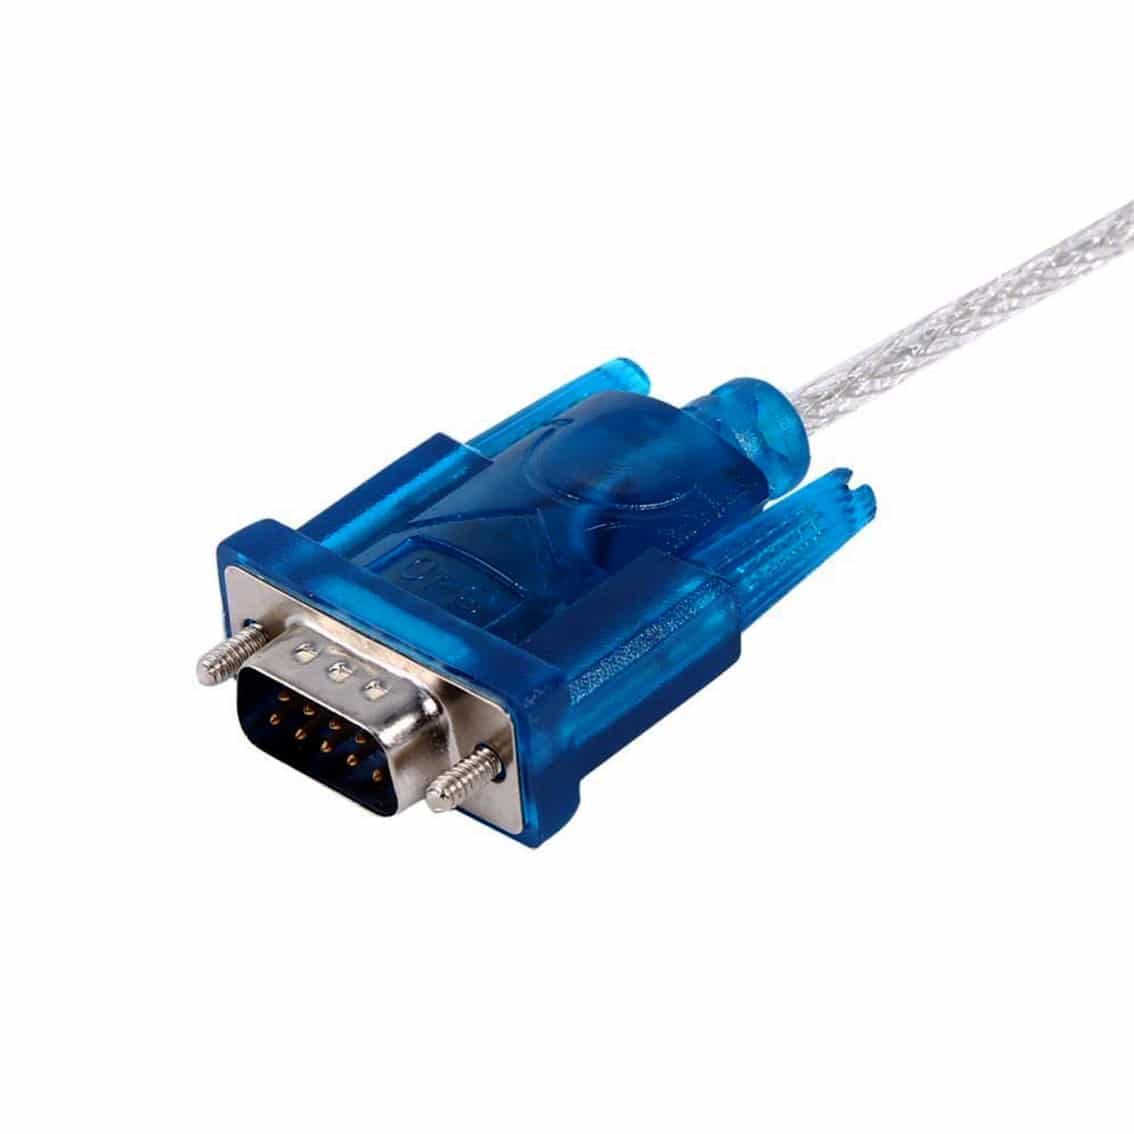 USB to RS232 DB9 Serial Port Converter Adapter Cable | Phipps Electronics